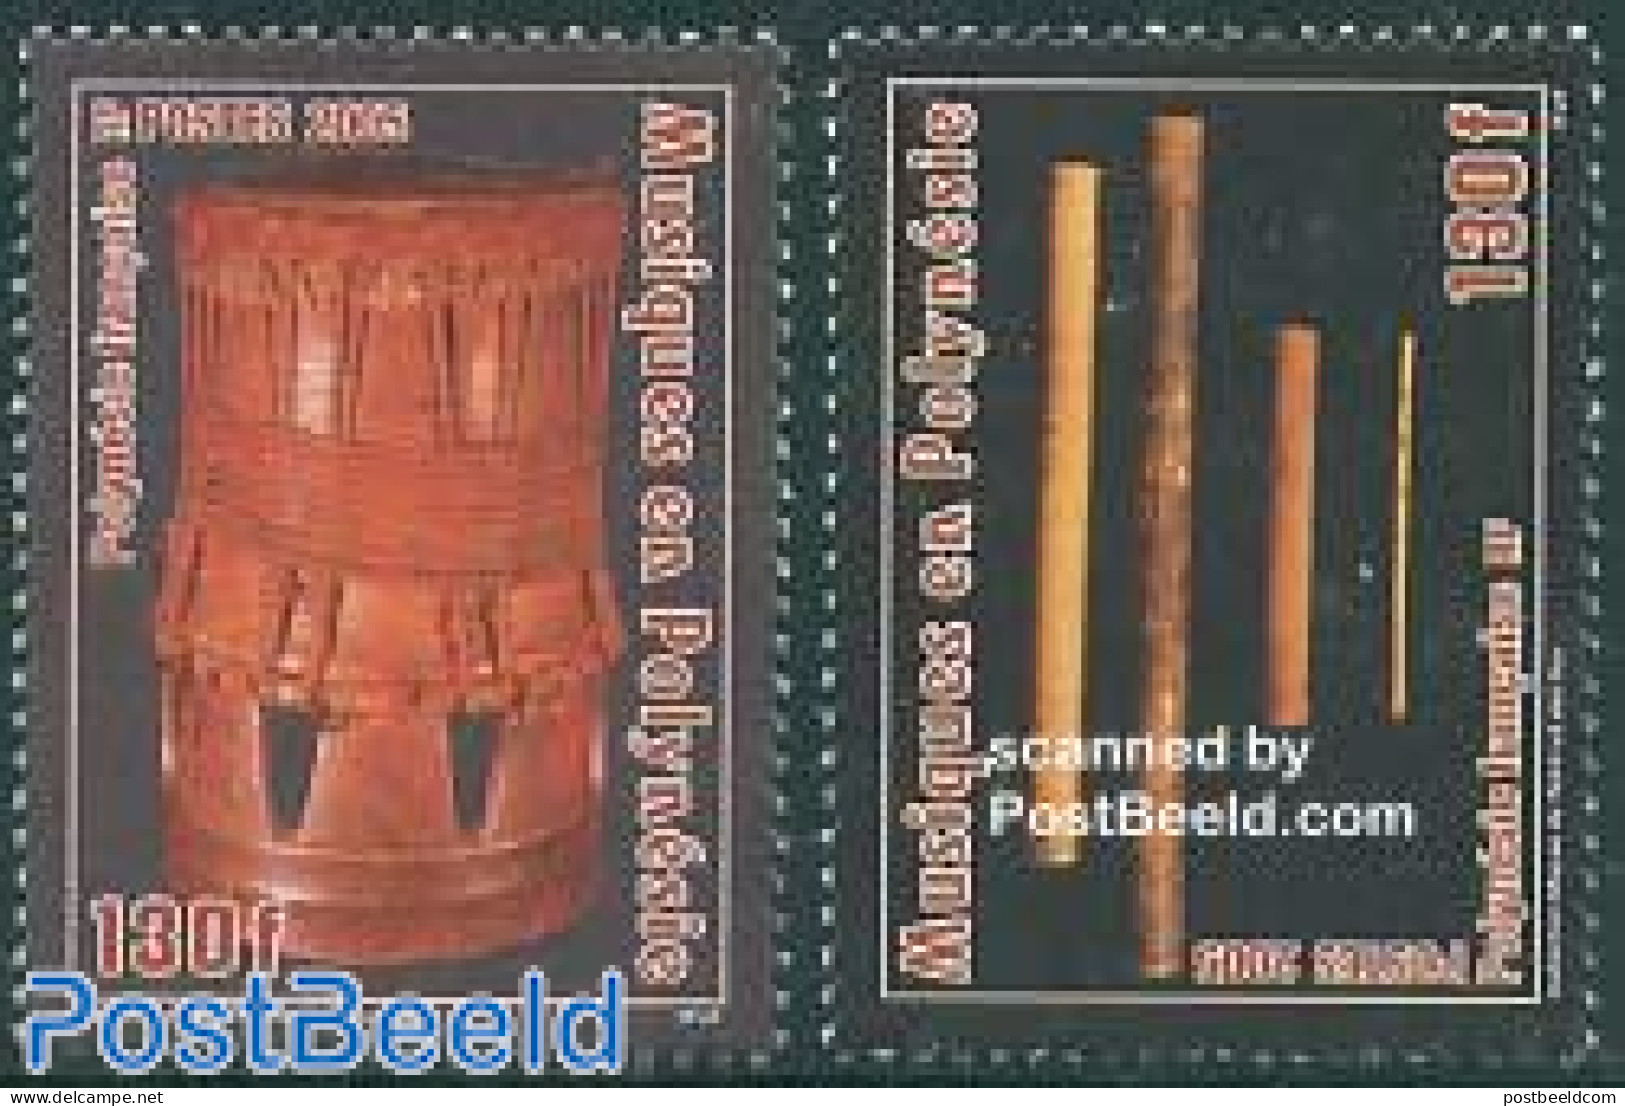 French Polynesia 2005 Music 2v, Mint NH, Performance Art - Music - Musical Instruments - Unused Stamps